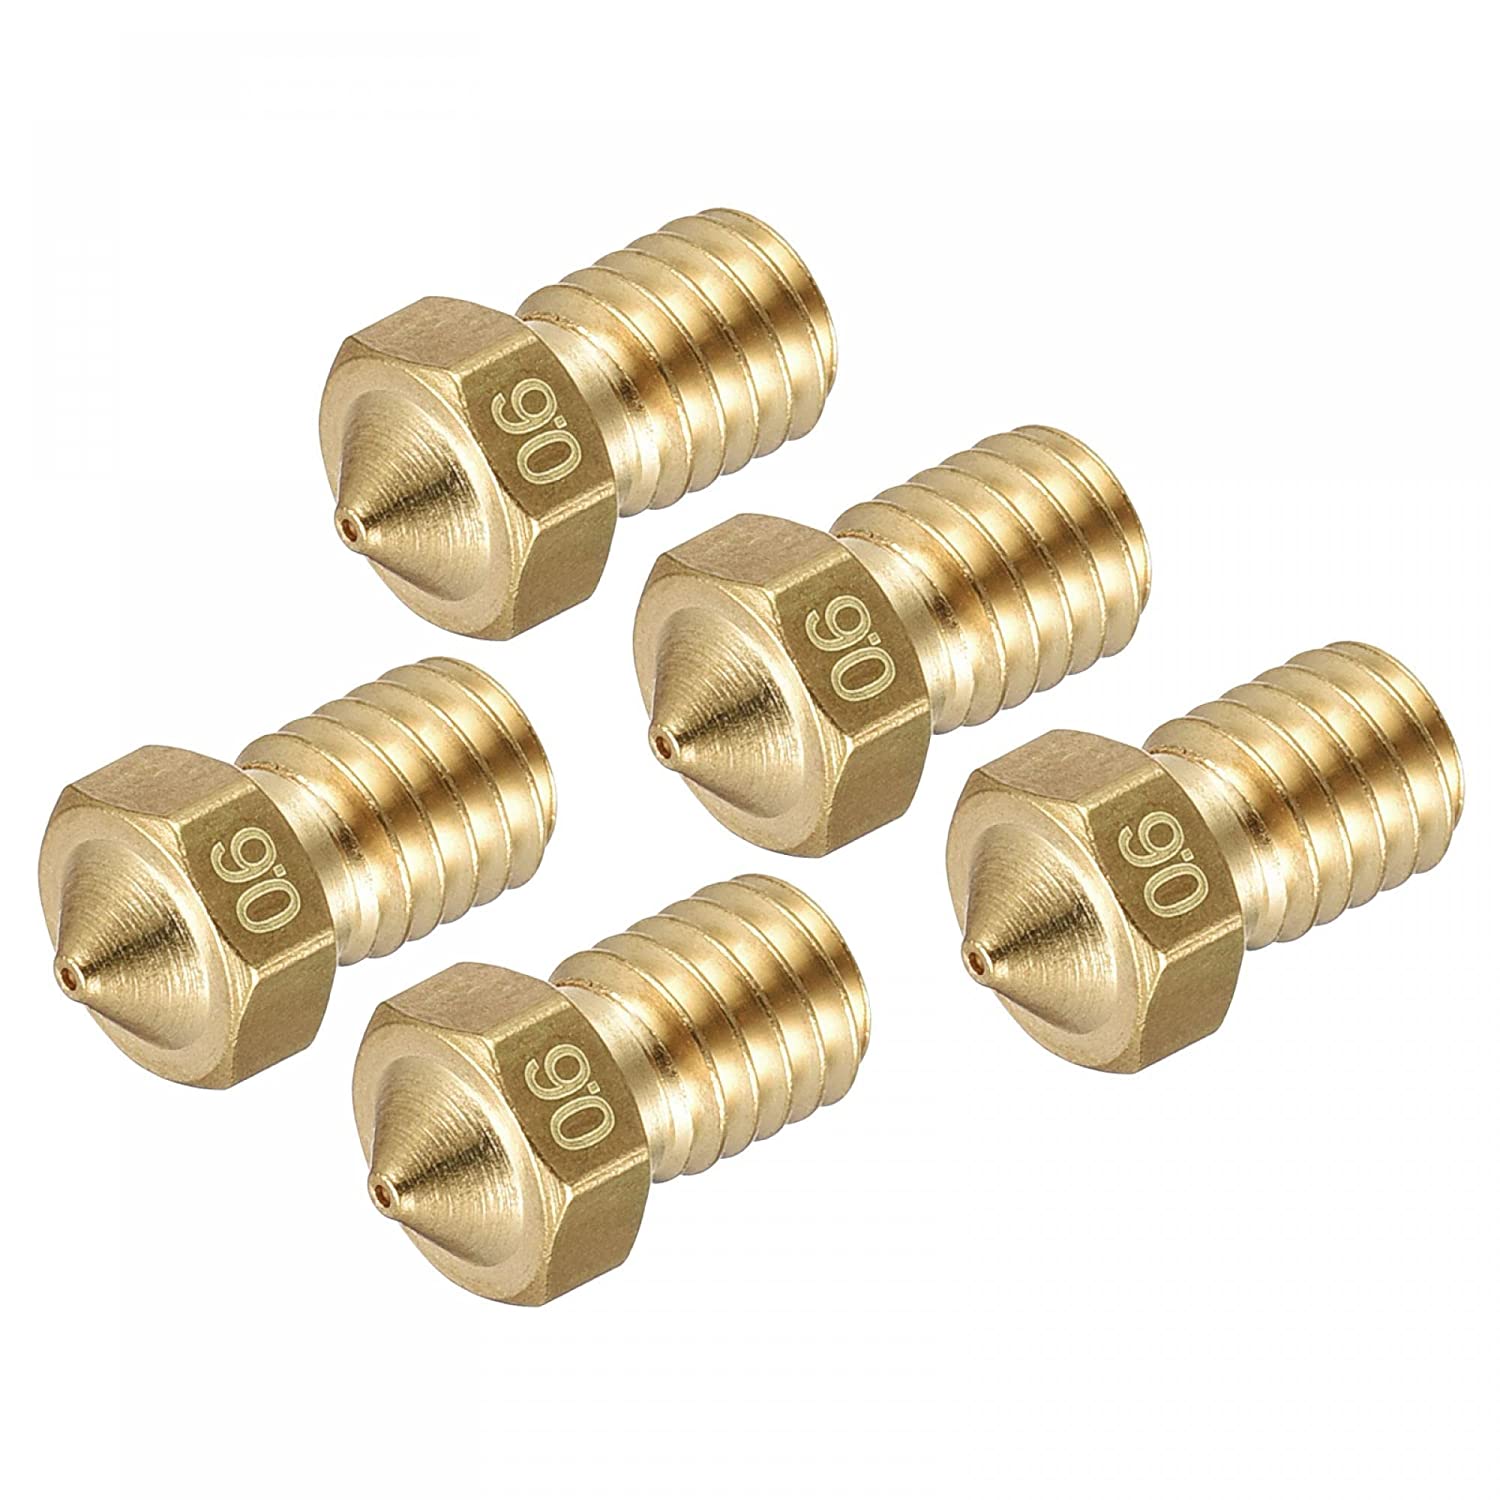 5pcs ANYCUBIC 0.6mm Brass Nozzles M6 Thread for 1.75mm Filament (Pack of 5)